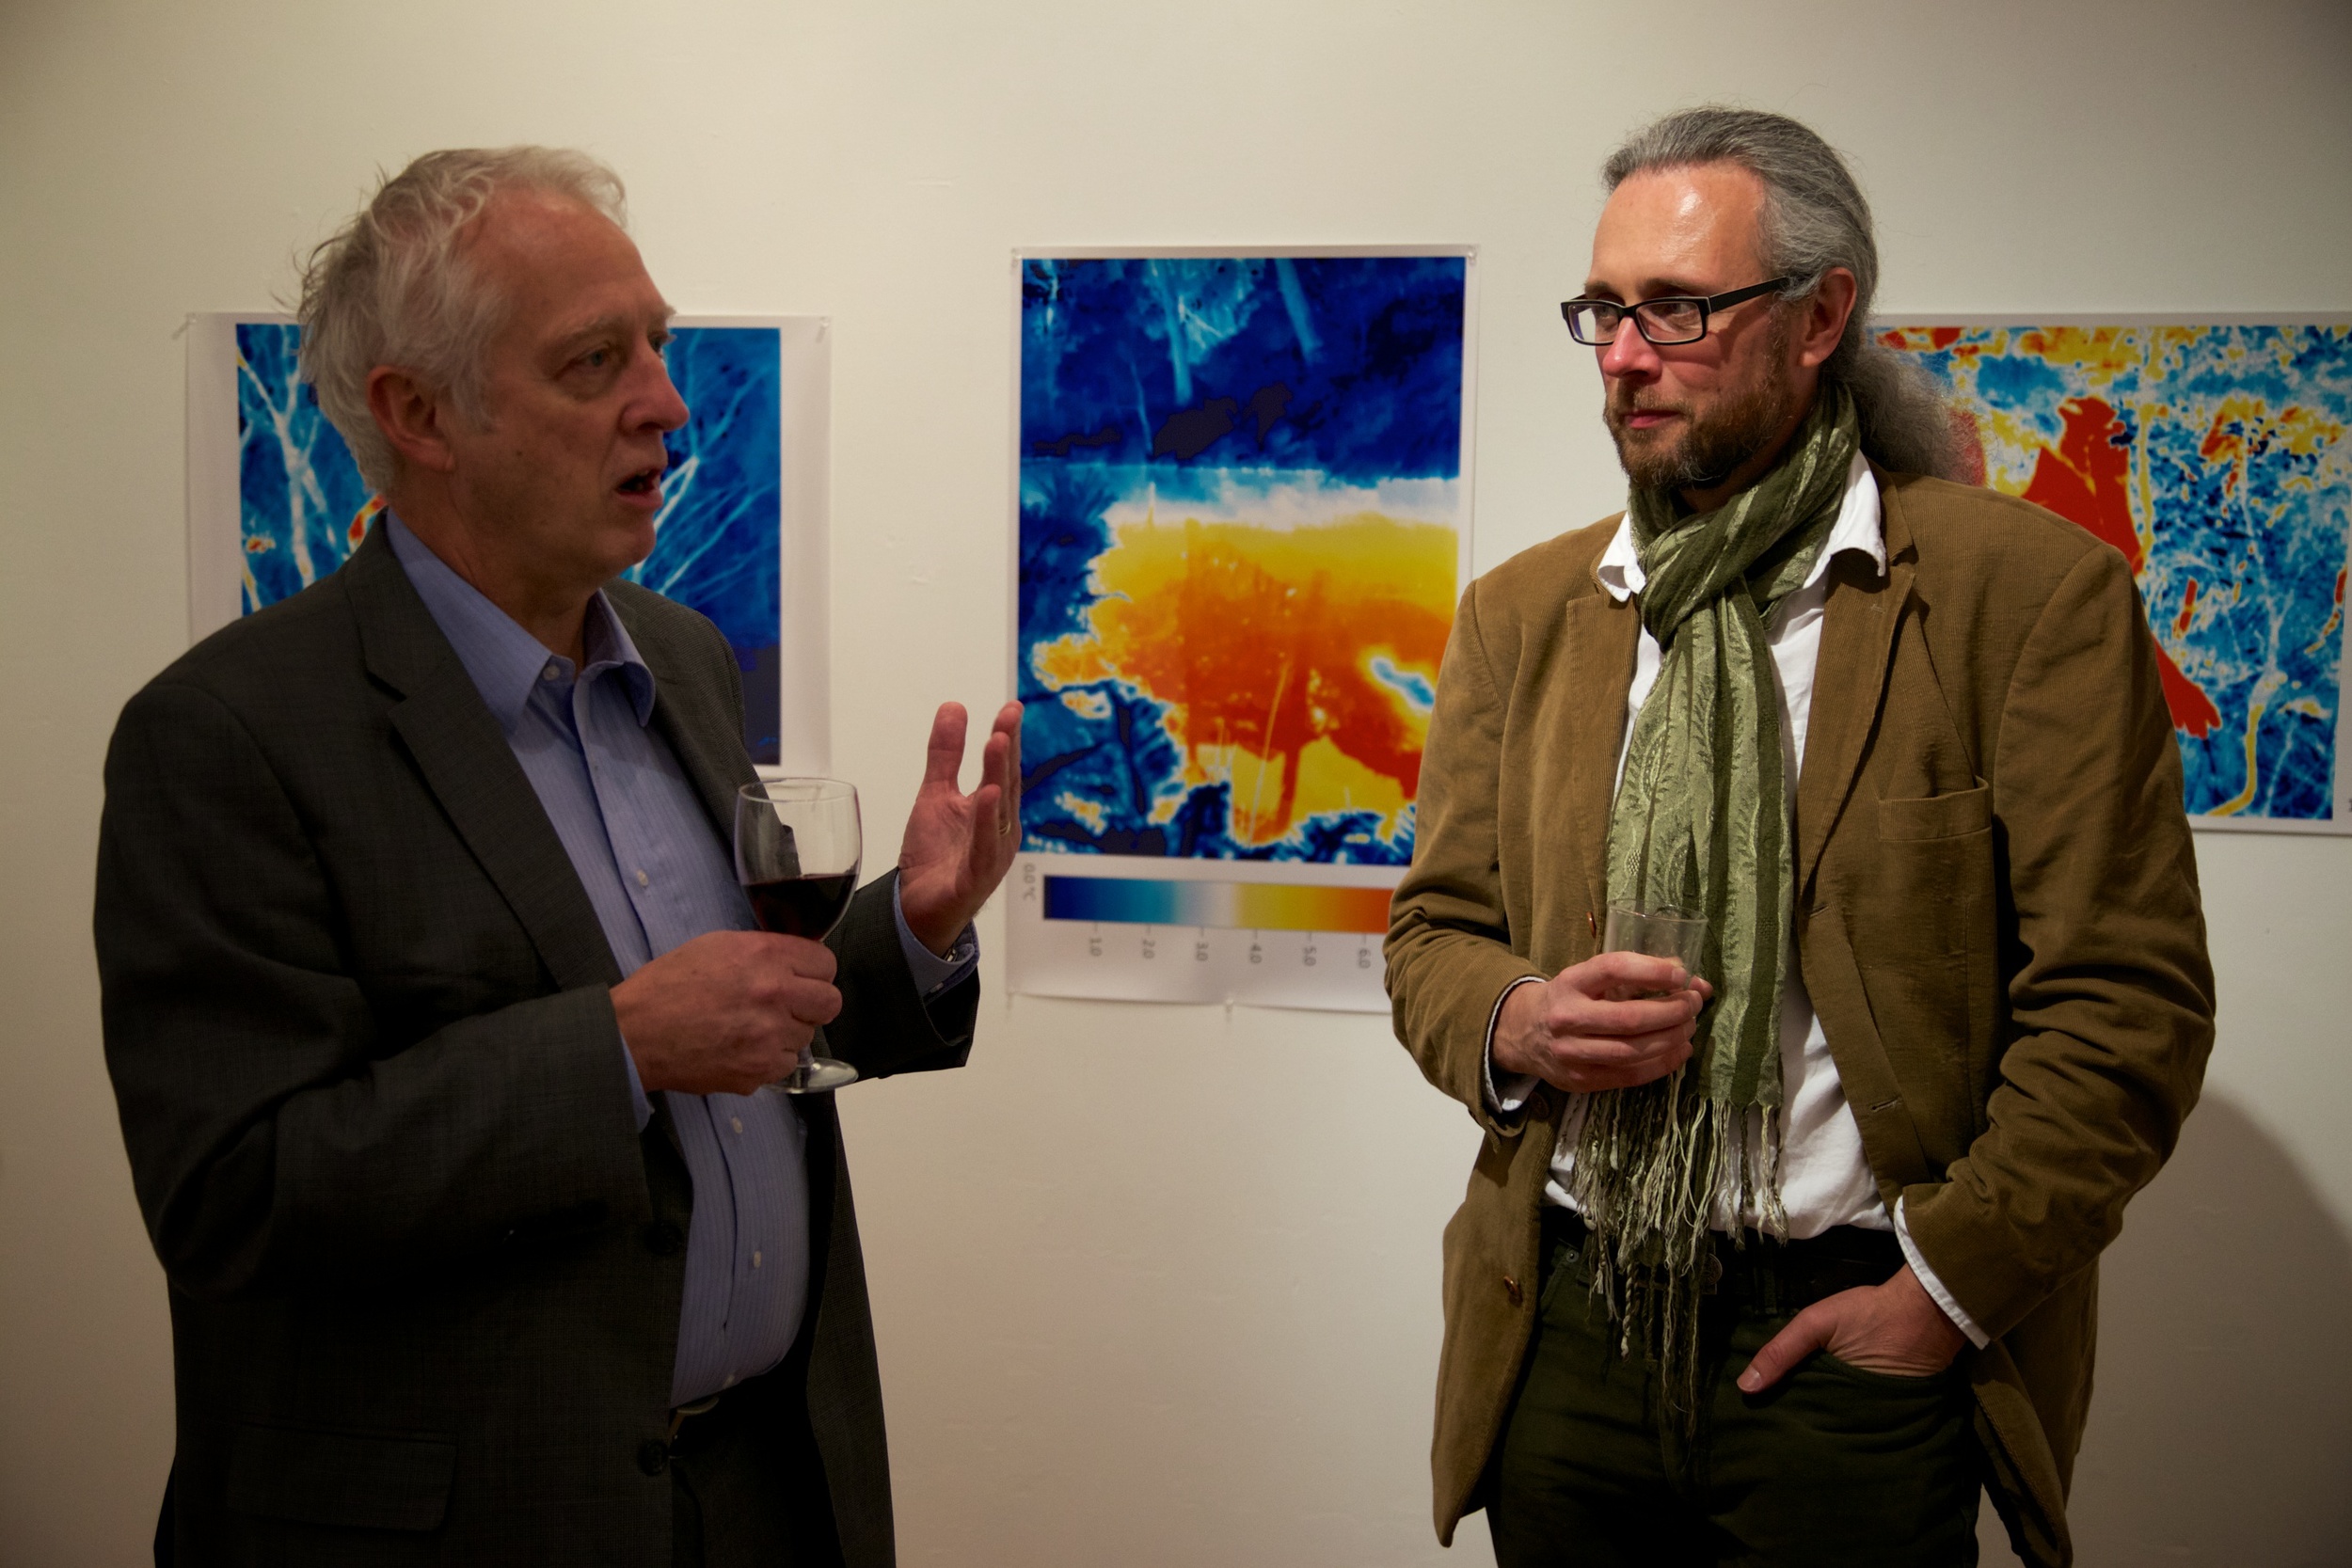 Images from the exhibition at Culture at Work's Accelerator Gallery